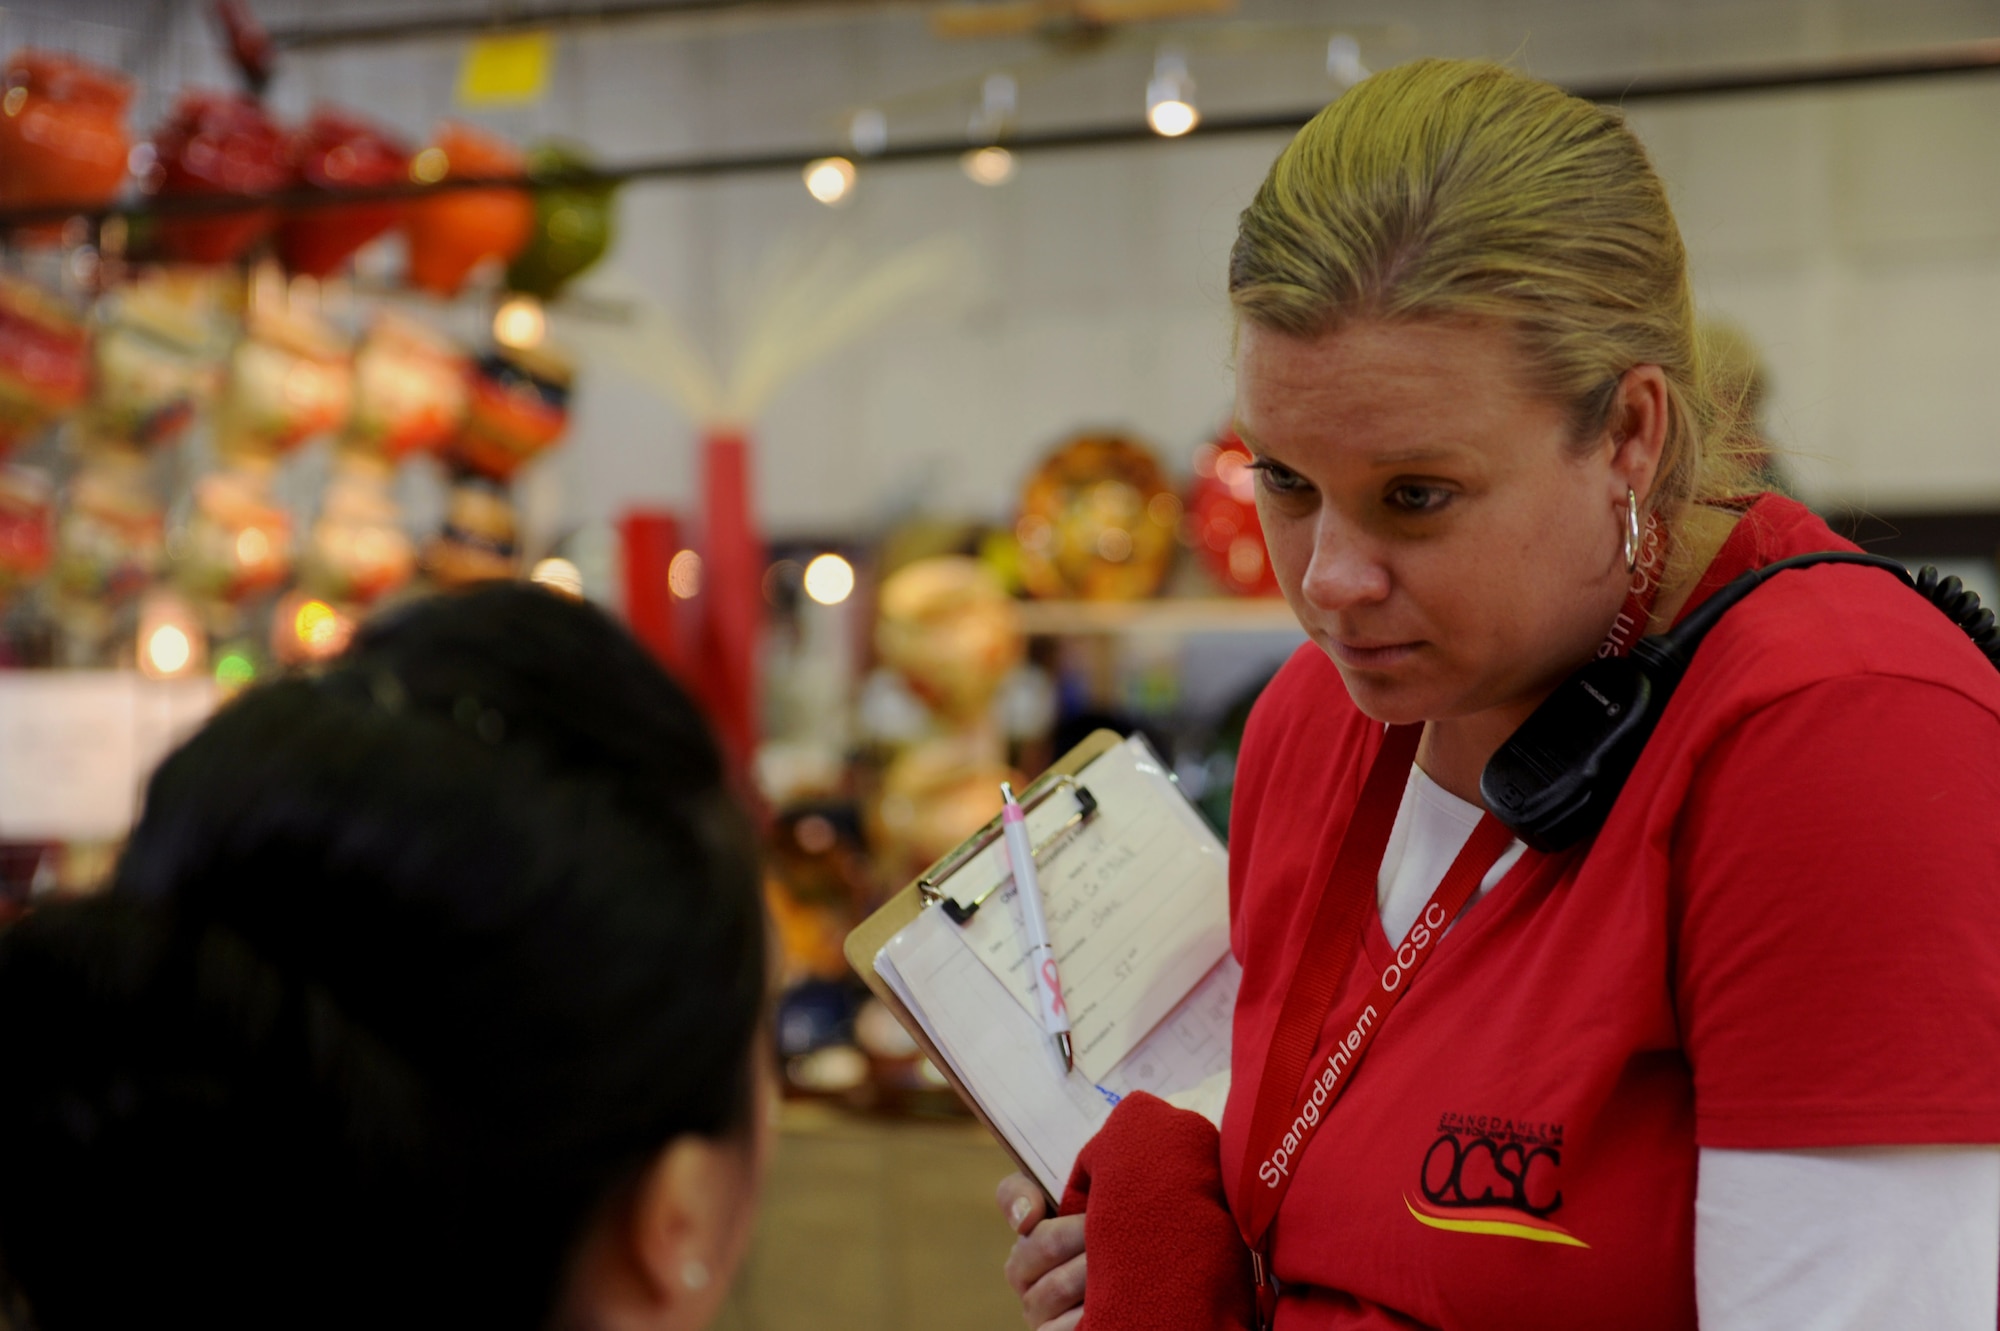 Erica Smith, a Sexual Assault Prevention and Response victim advocate from Lexington, S.C., and wife of U.S. Air Force Capt. Warren Smith, a 52nd Equipment Maintenance Squadron operations officer, talks with a fellow bazaar board member during the 2014 Holiday Bazaar in Hangar 1 at Spangdahlem Air Base, Germany, Oct. 25, 2014. Smith organized the event as the Bazaar Chair of the Officers’ and Civilians’ Spouses Club. (U.S. Air Force photo by Airman 1st Class Timothy Kim/Released)